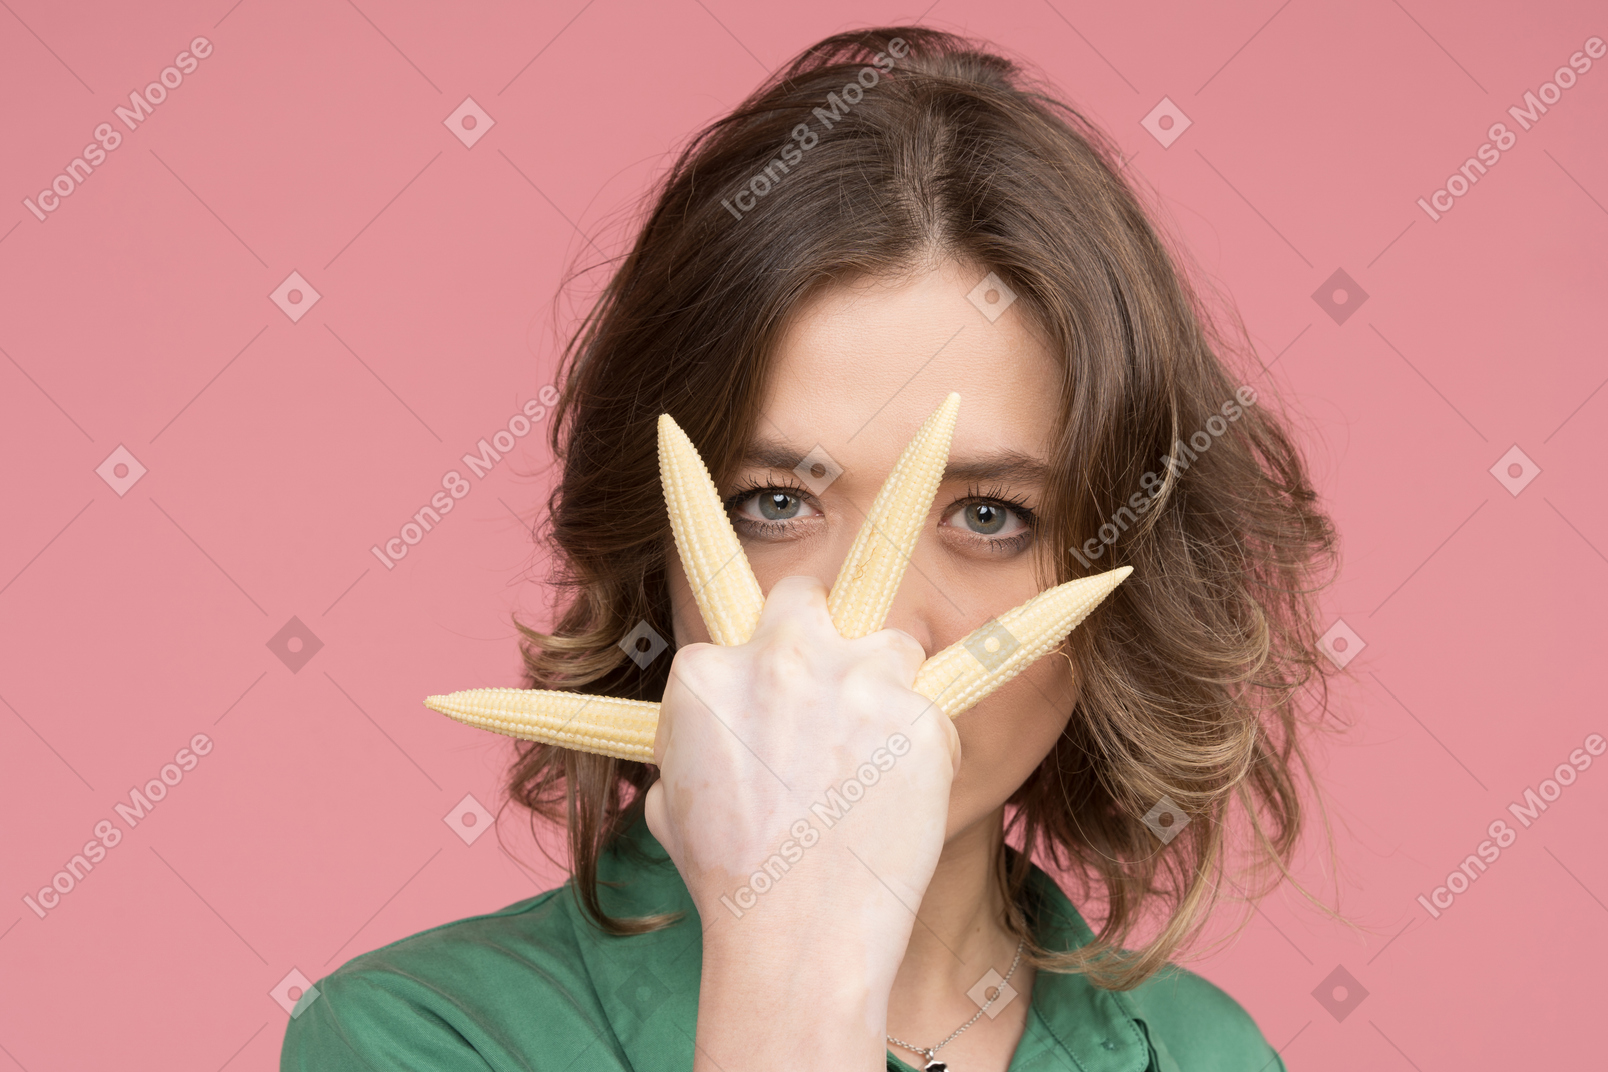 Confident woman holding baby corn in fist